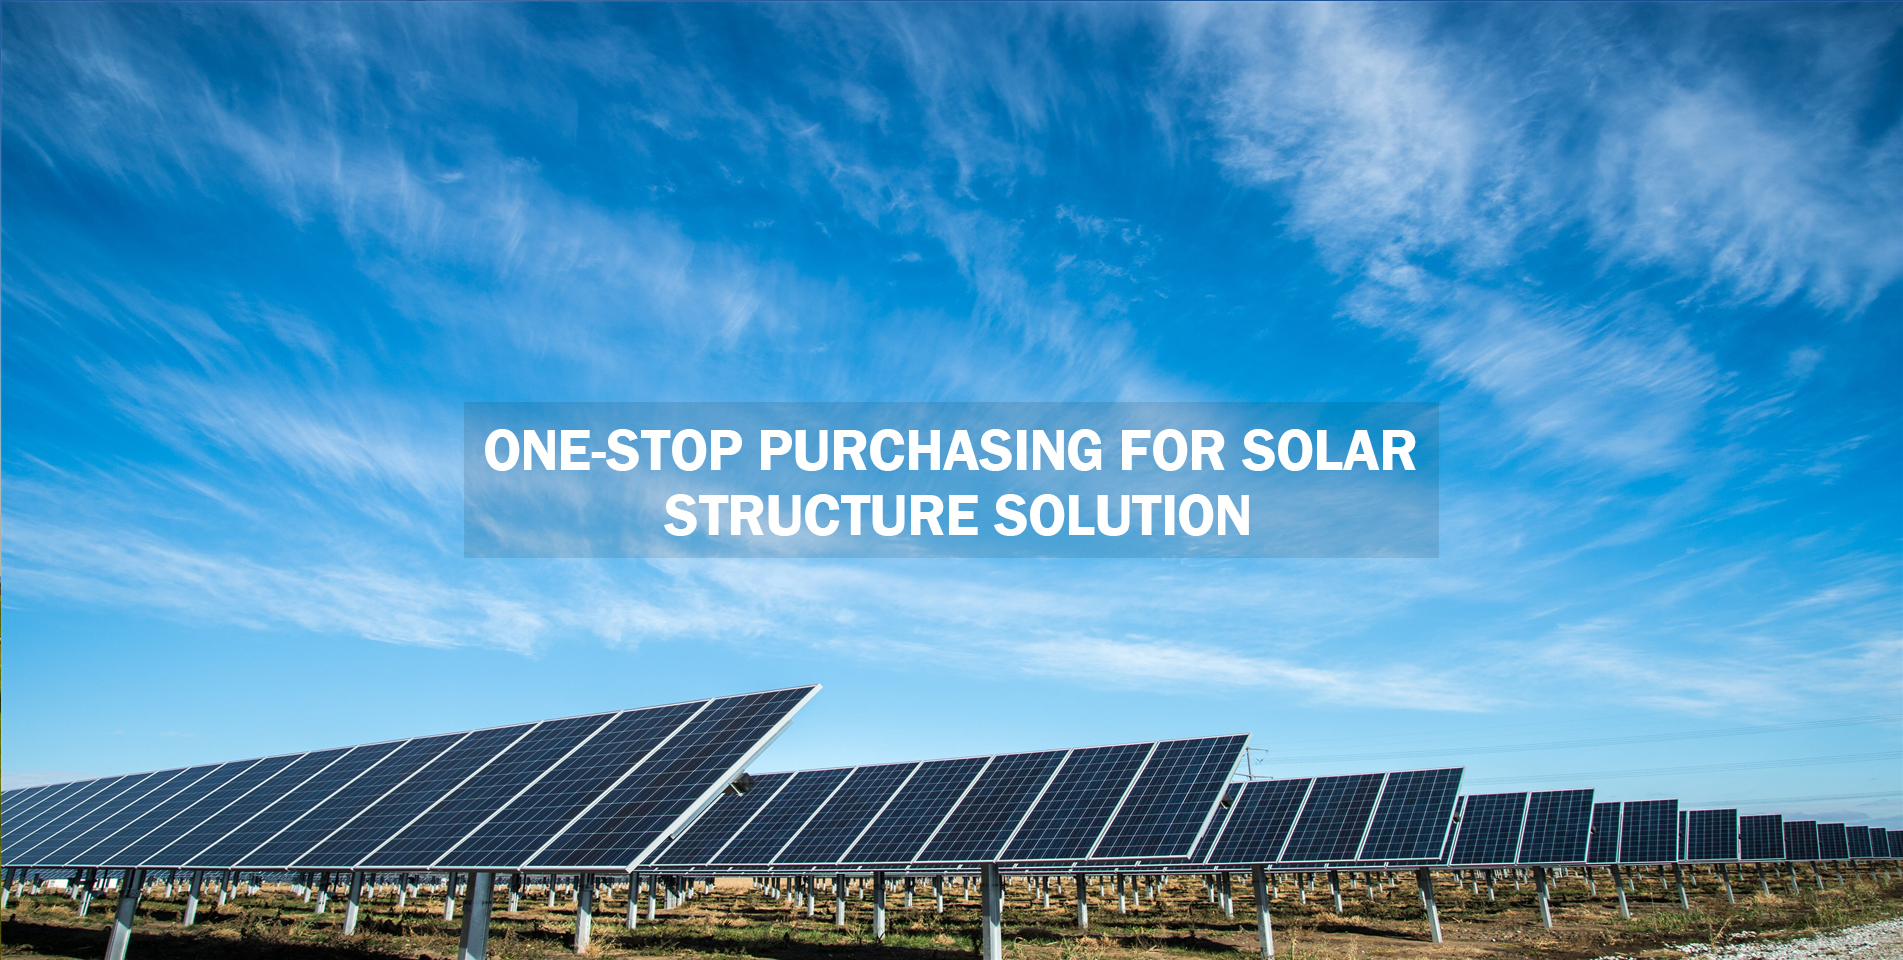 One-stop purchasing for solar structure solution